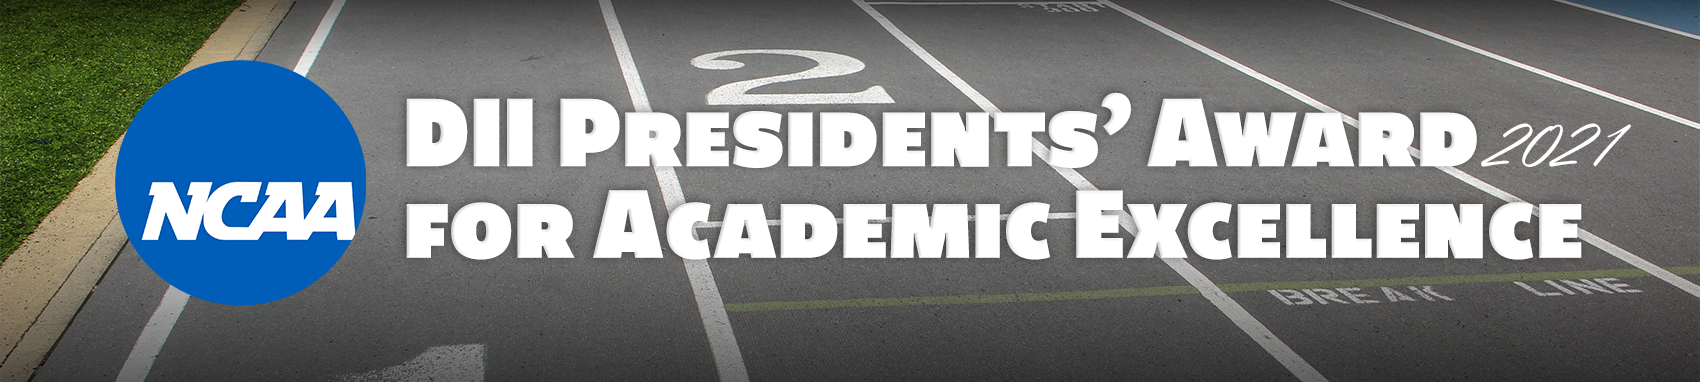 2021 DII Presidents' Award for Academic Excellence